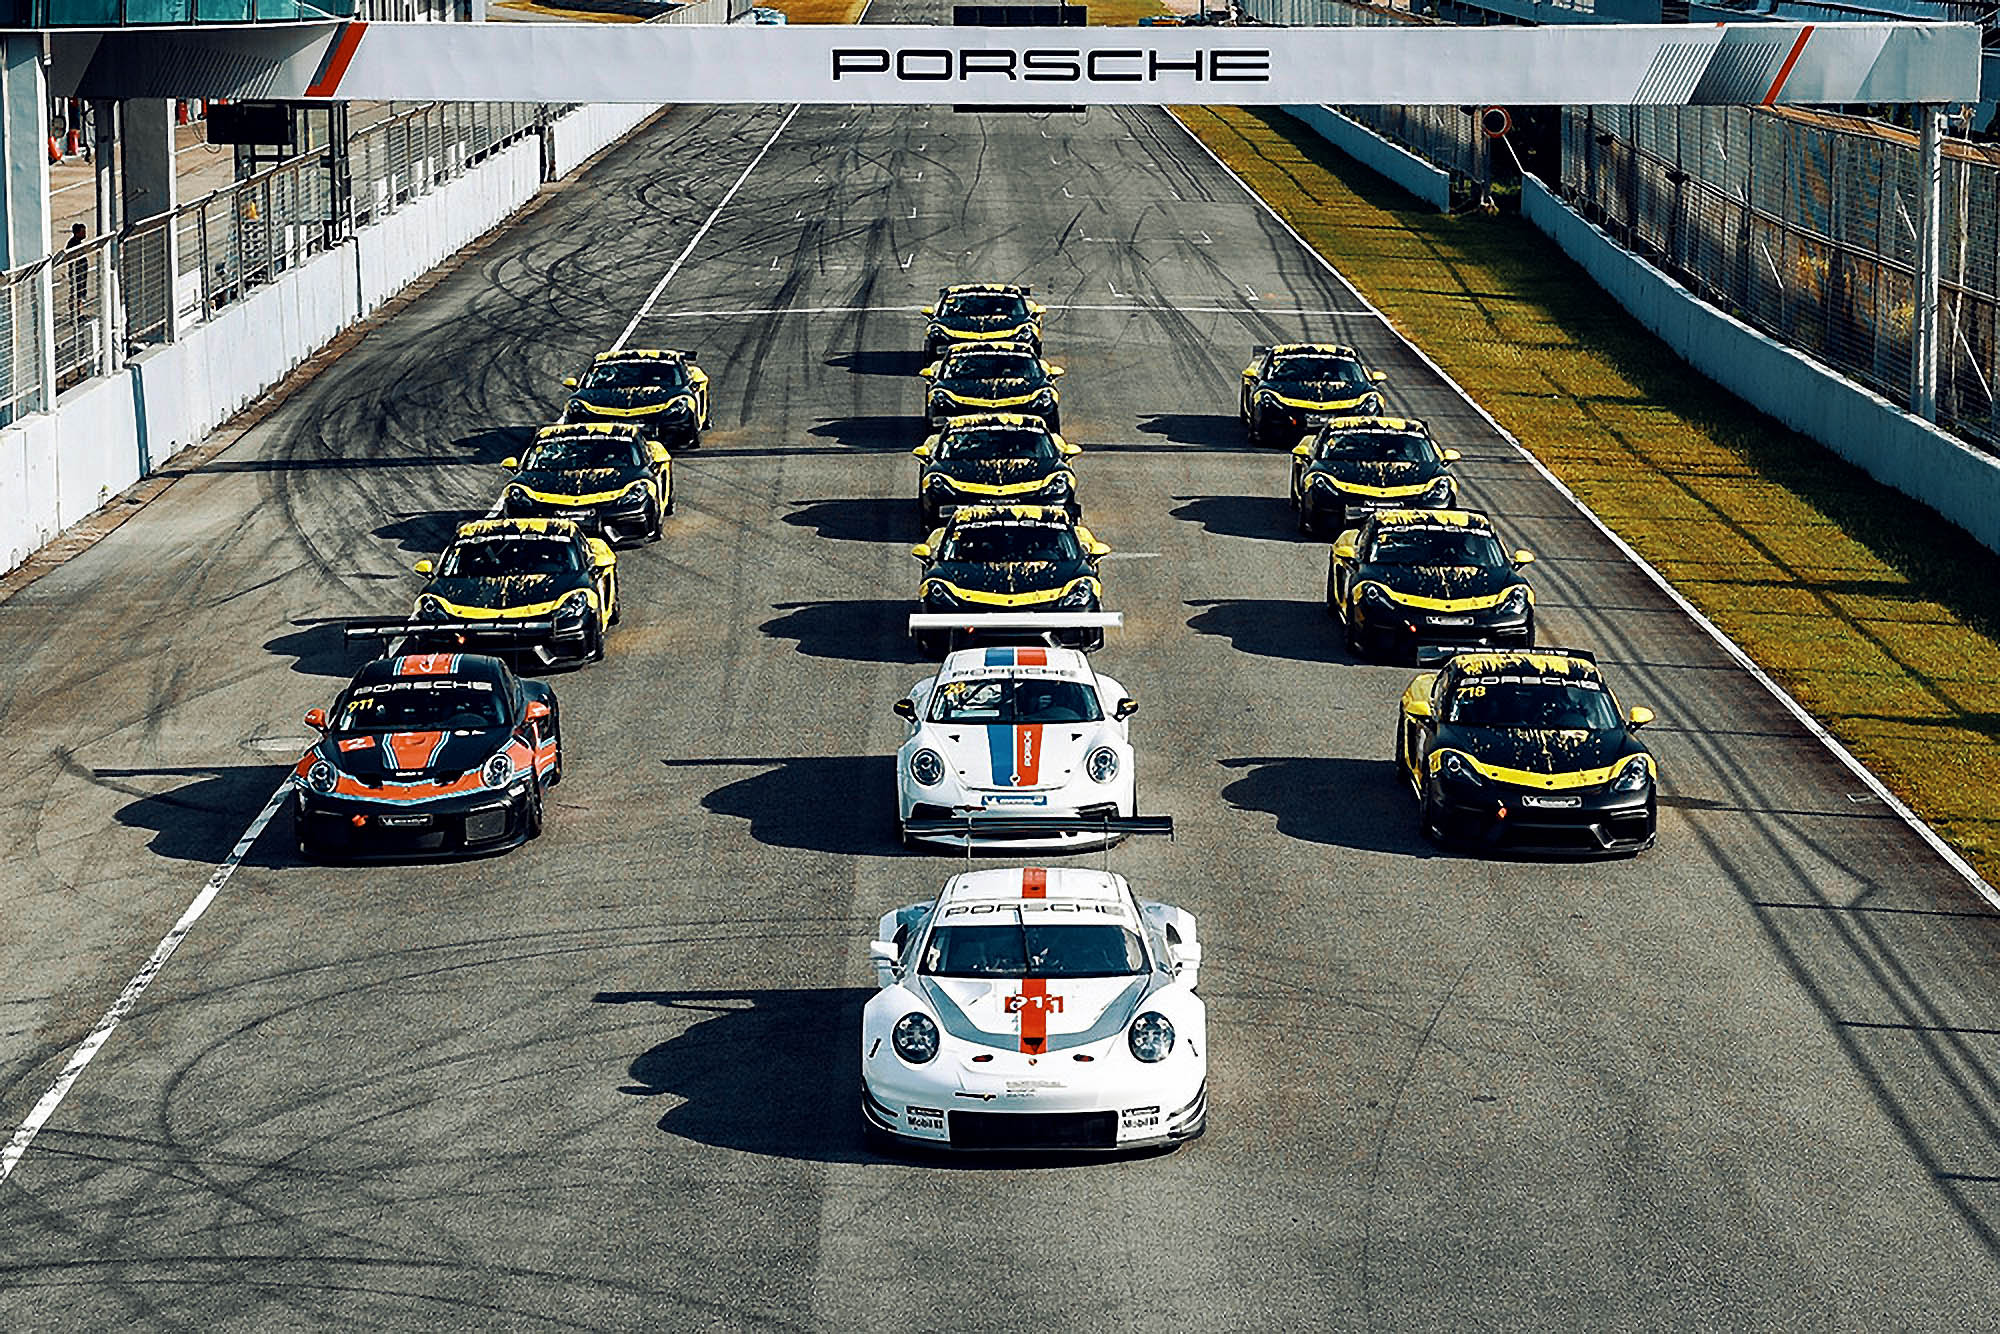 Three lines of Porsche cars on the starting grid of a track